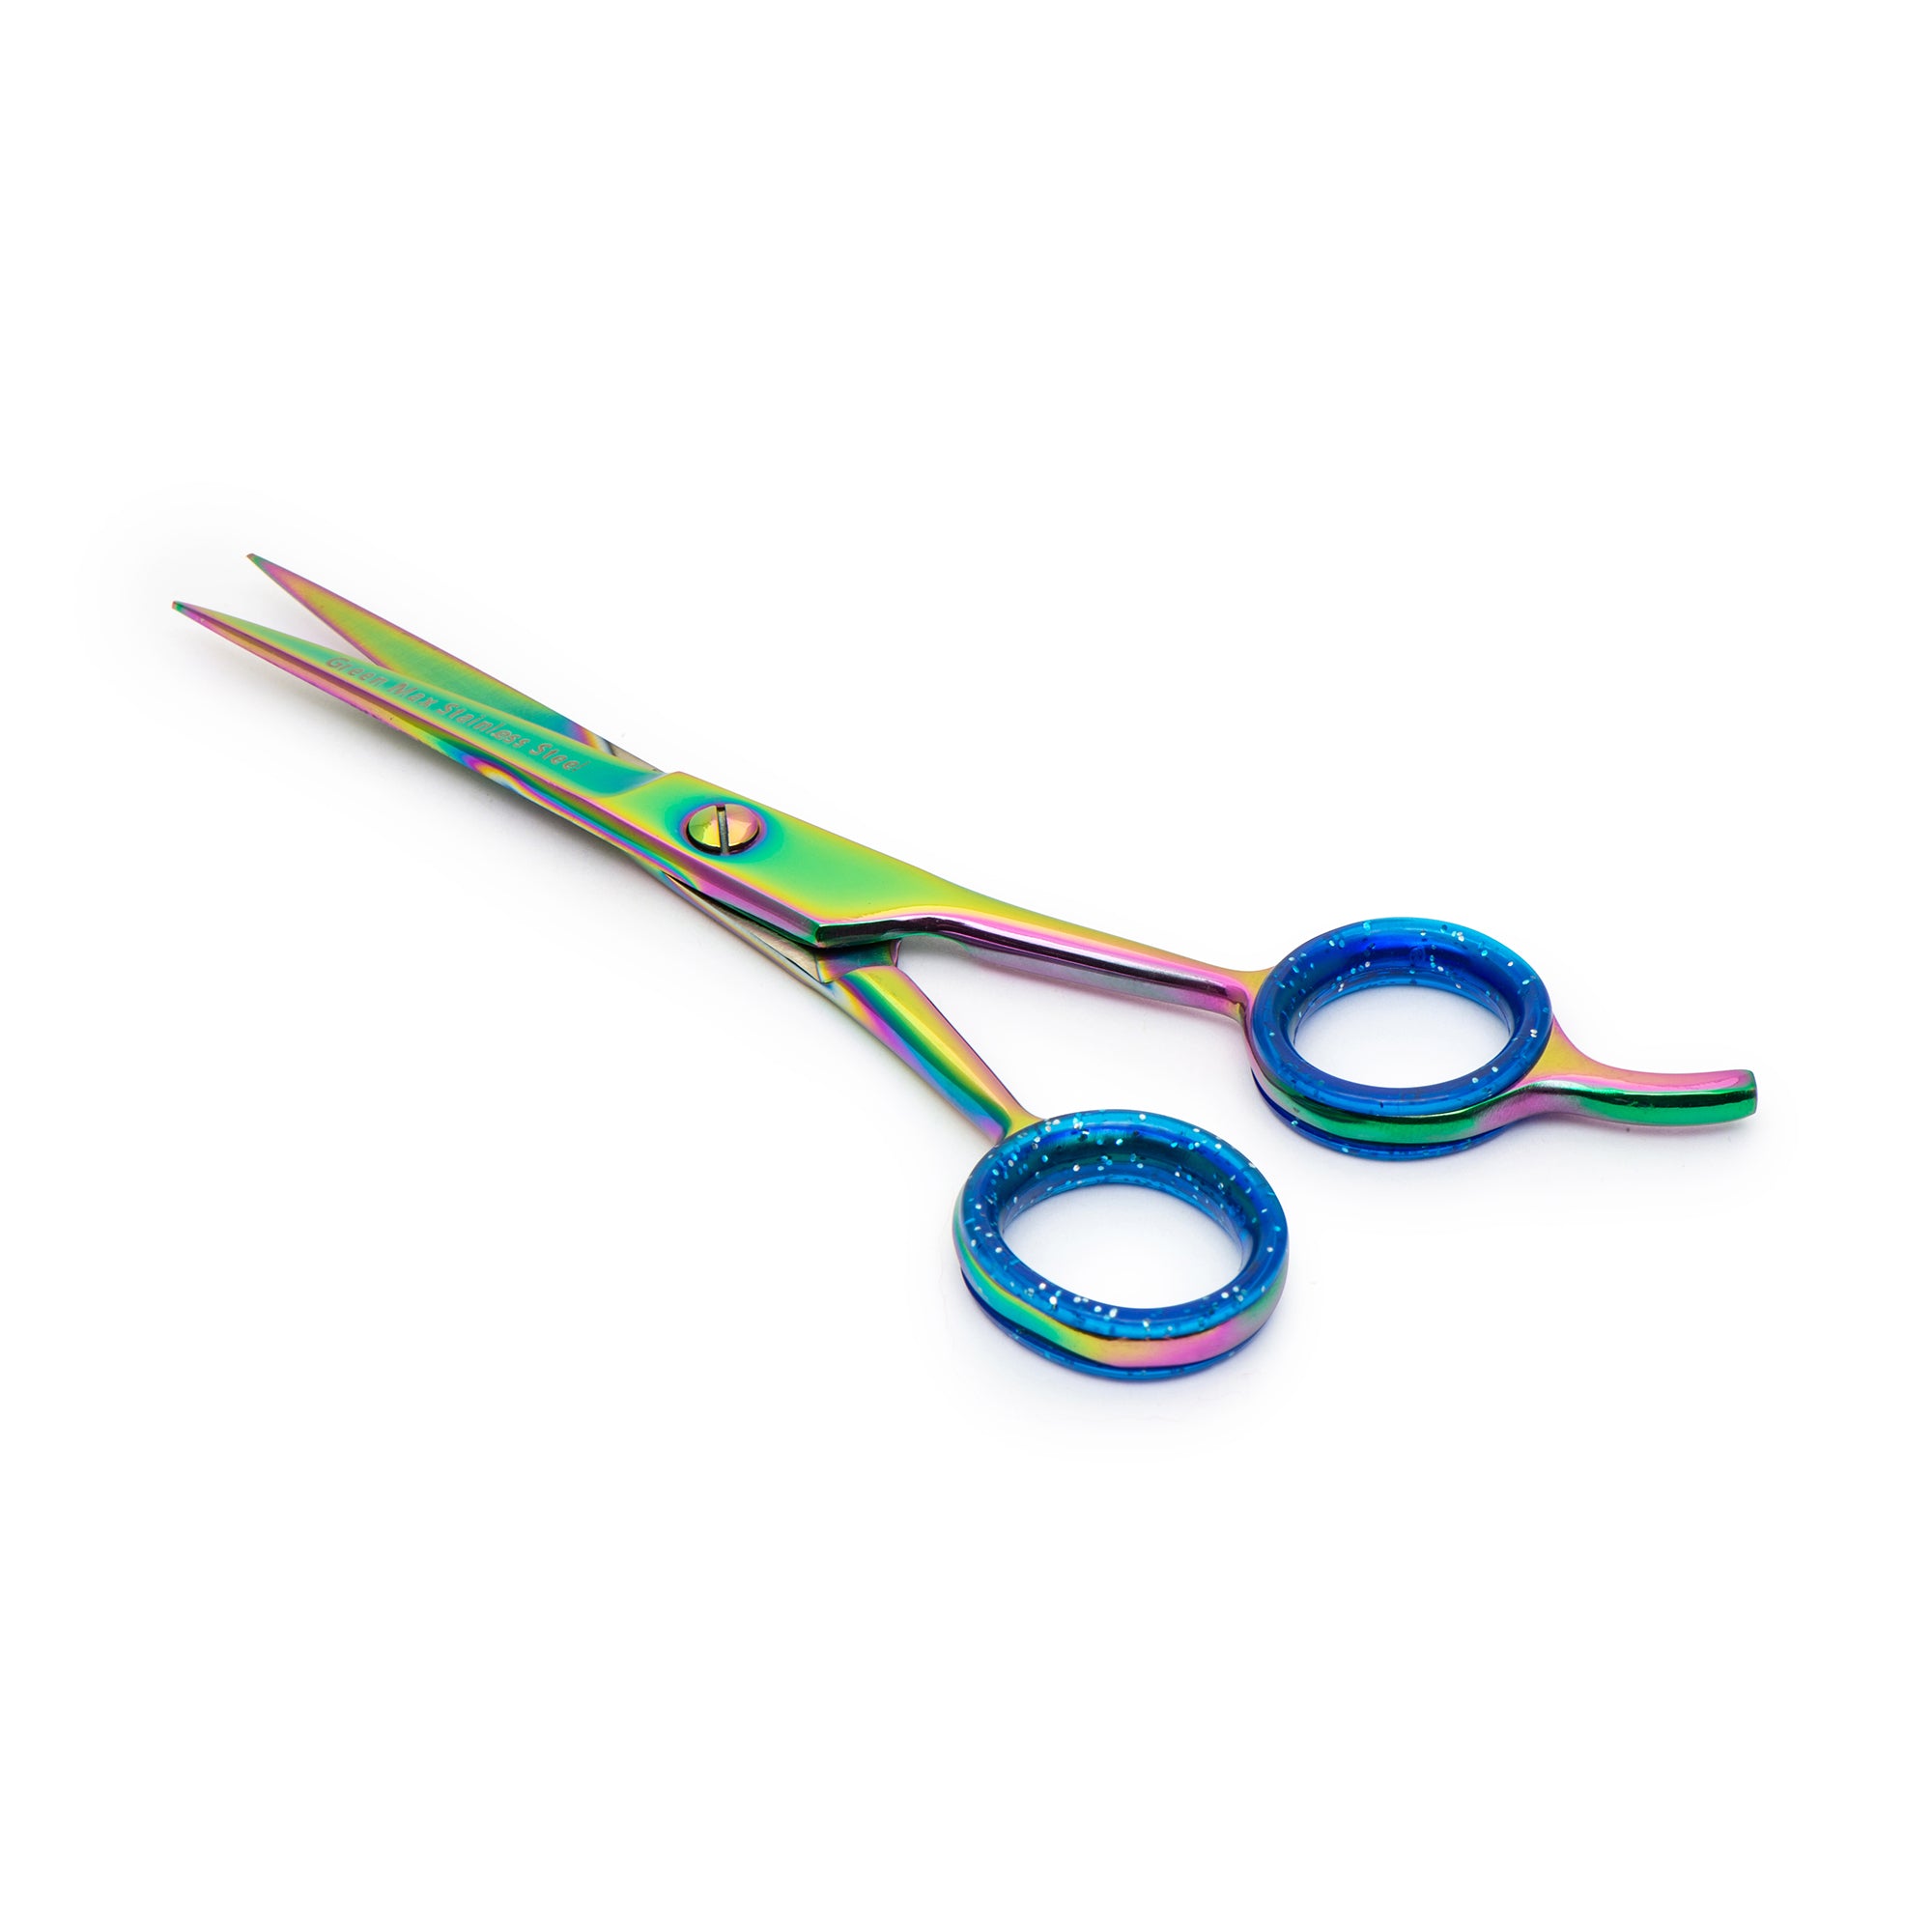 Professional Grooming Scissors for Personal Care Facial Hair Removal a –  GREENMAX PRO CANADA INC